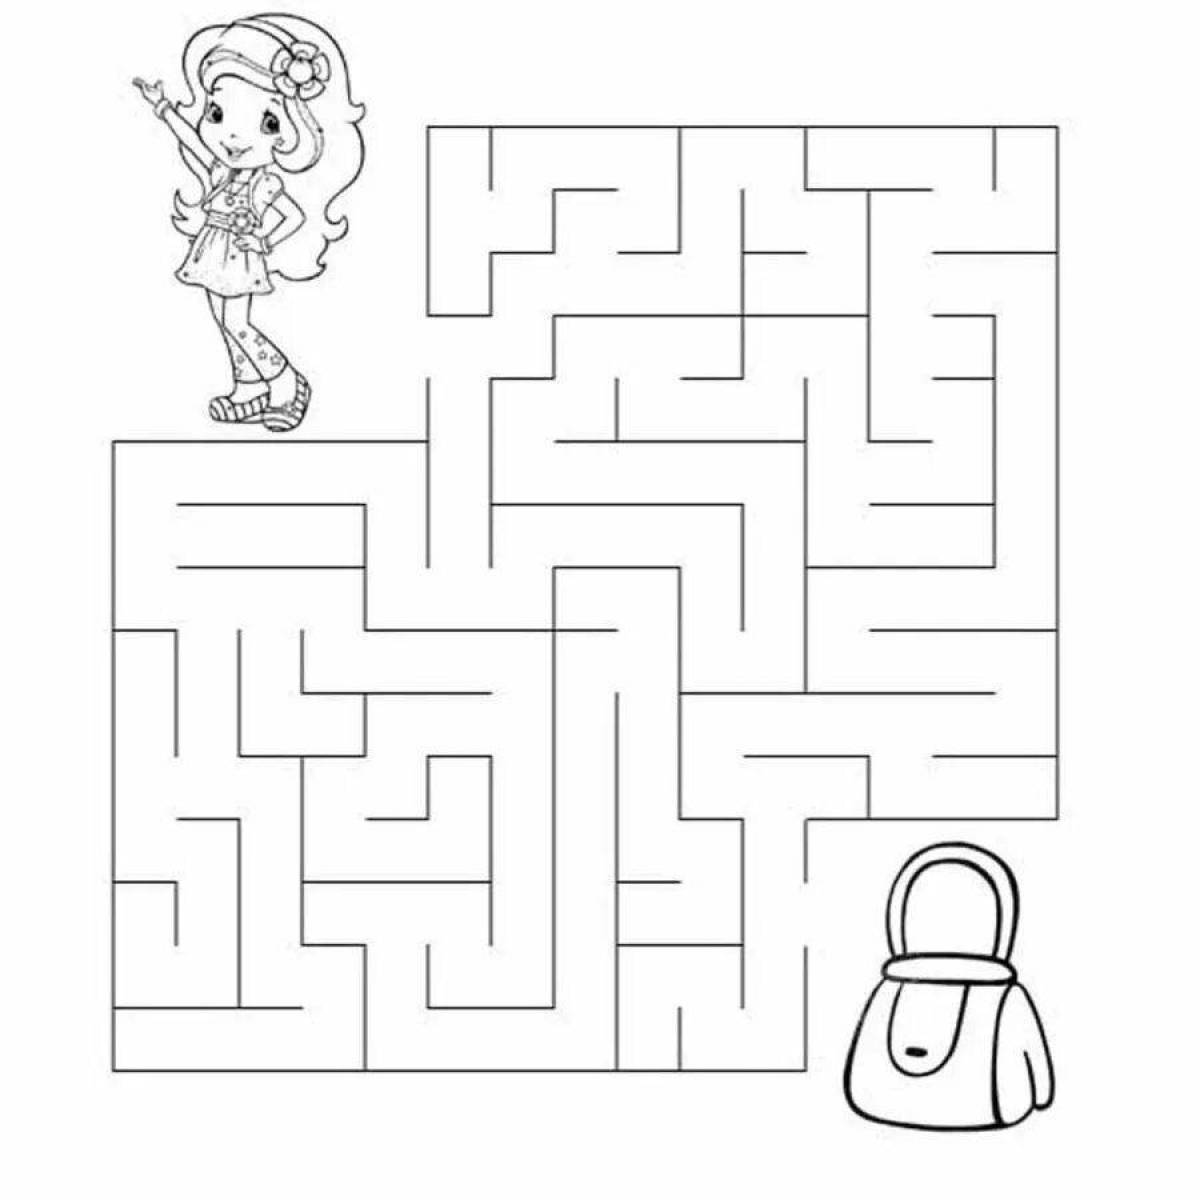 A fun coloring game for girls 6-7 years old